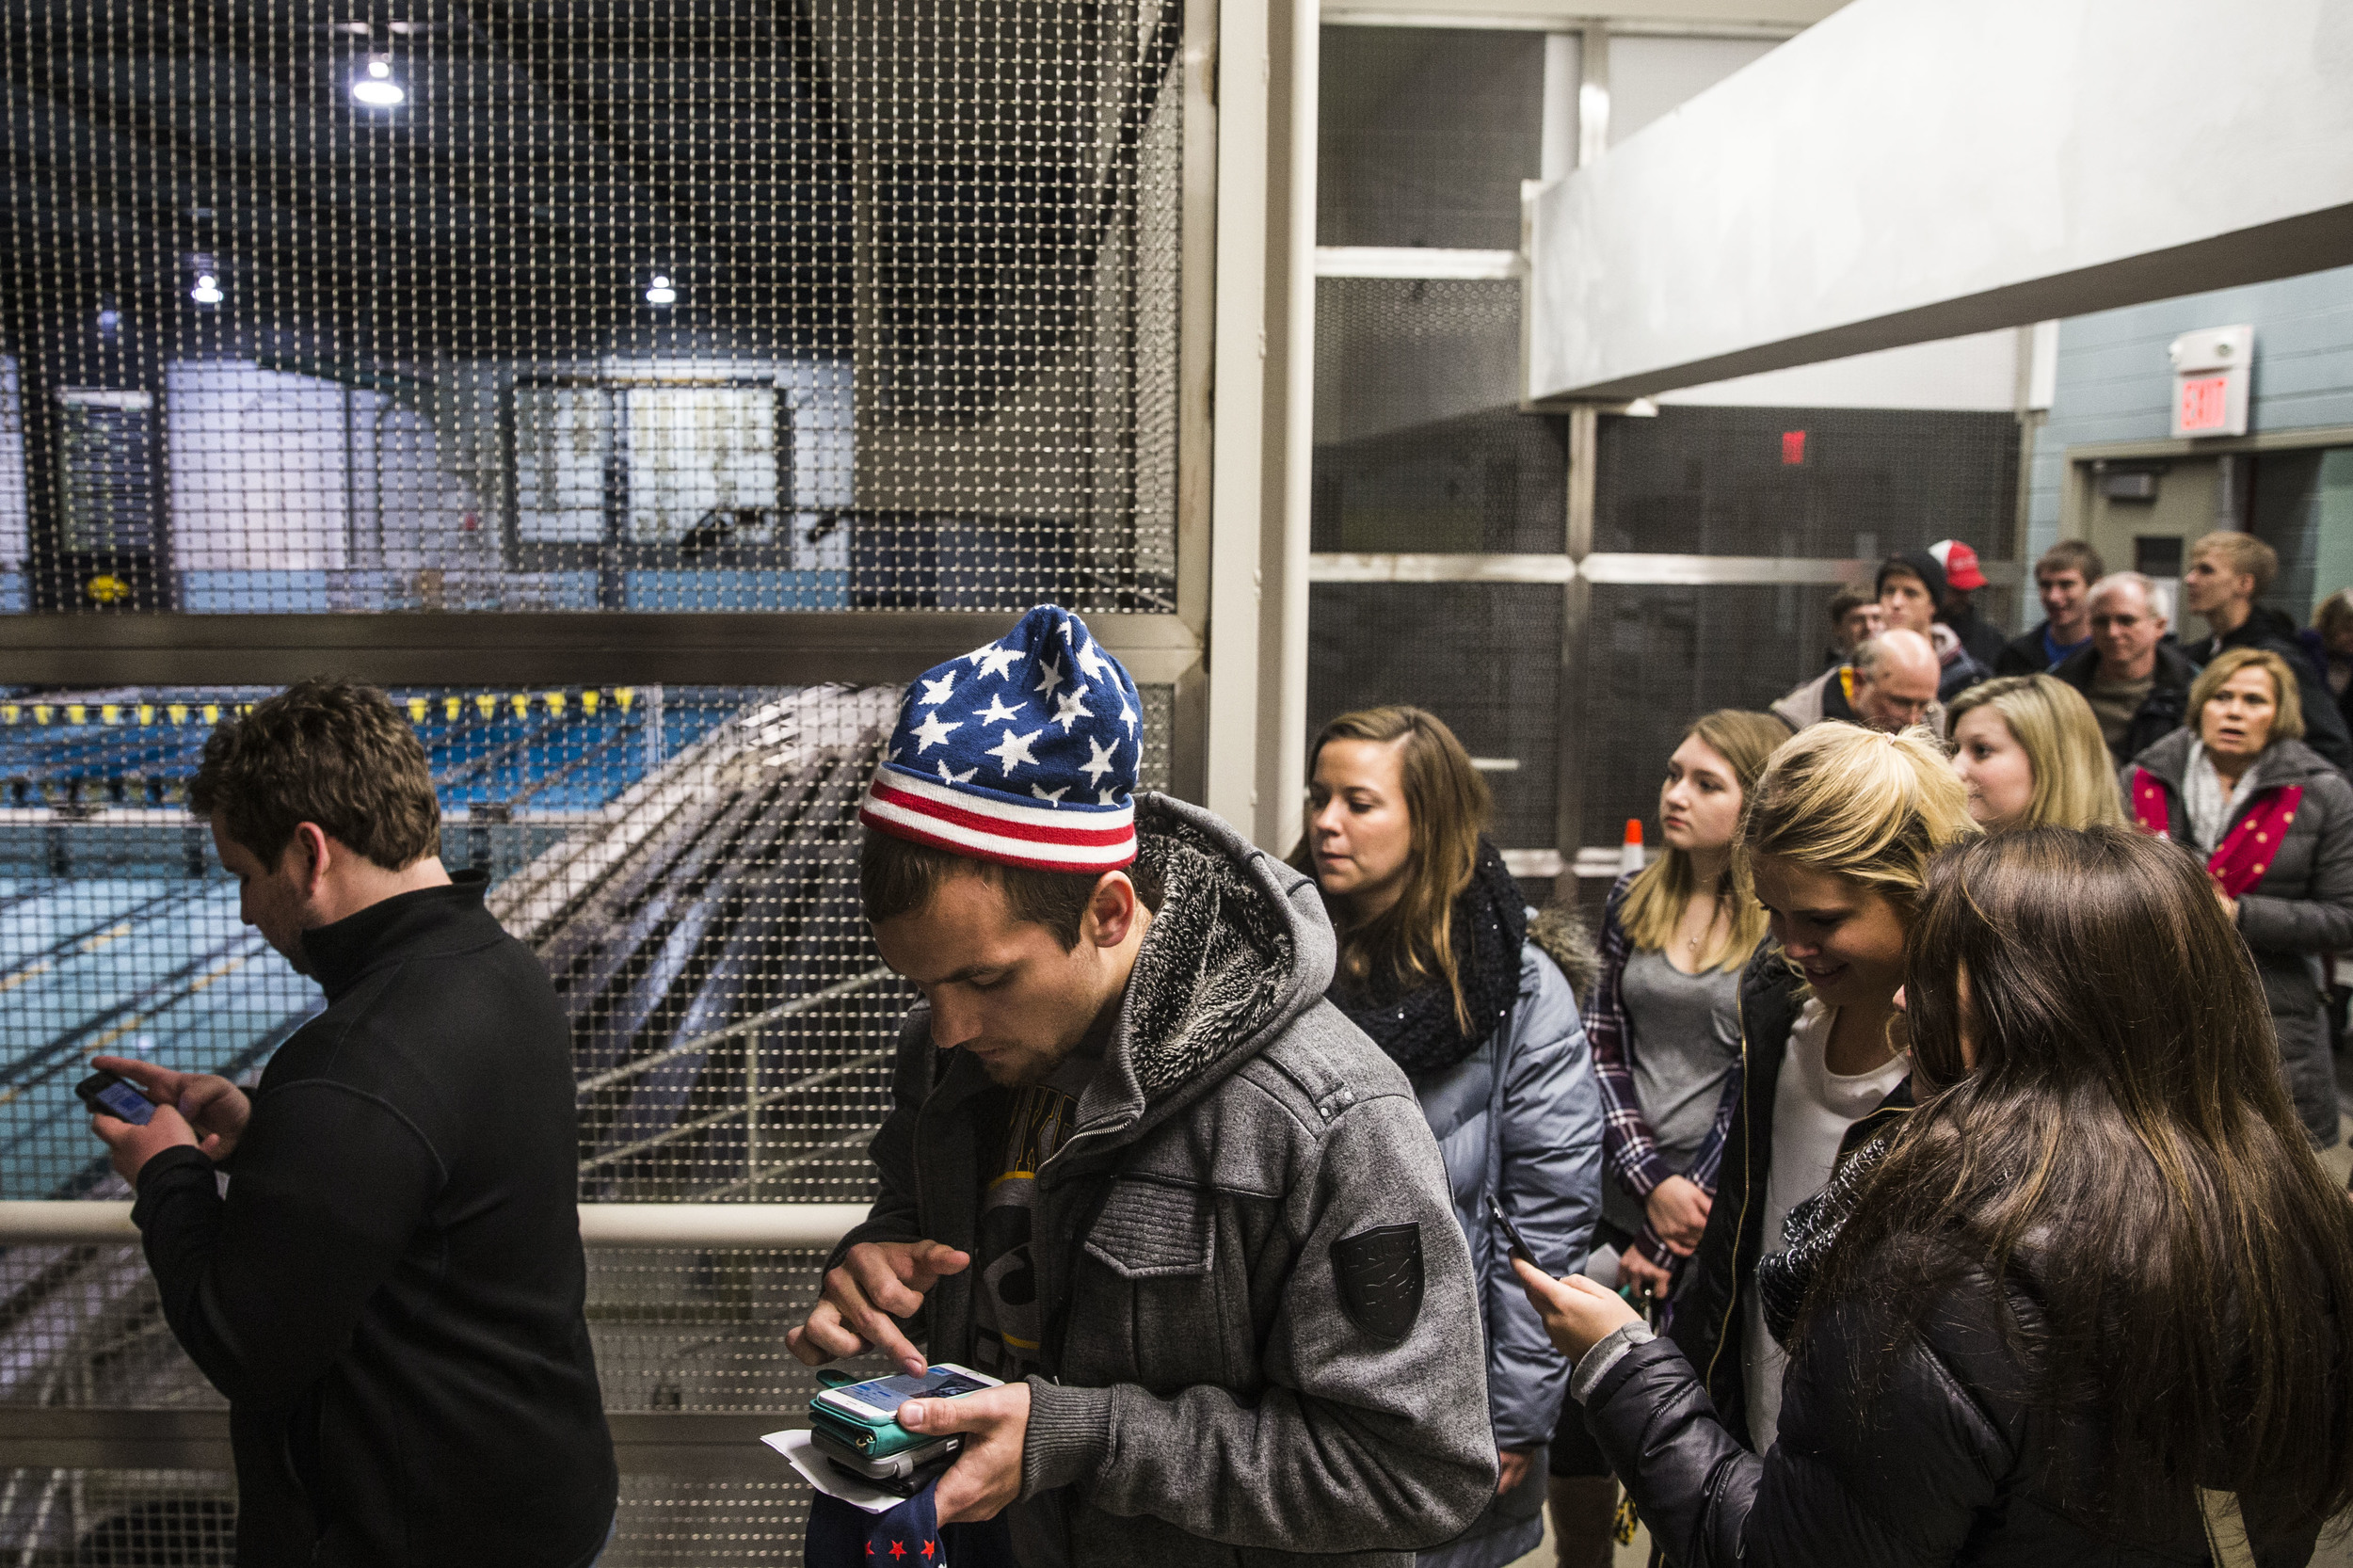 People stand in a line to attend Donald Trump's rally in Iowa City